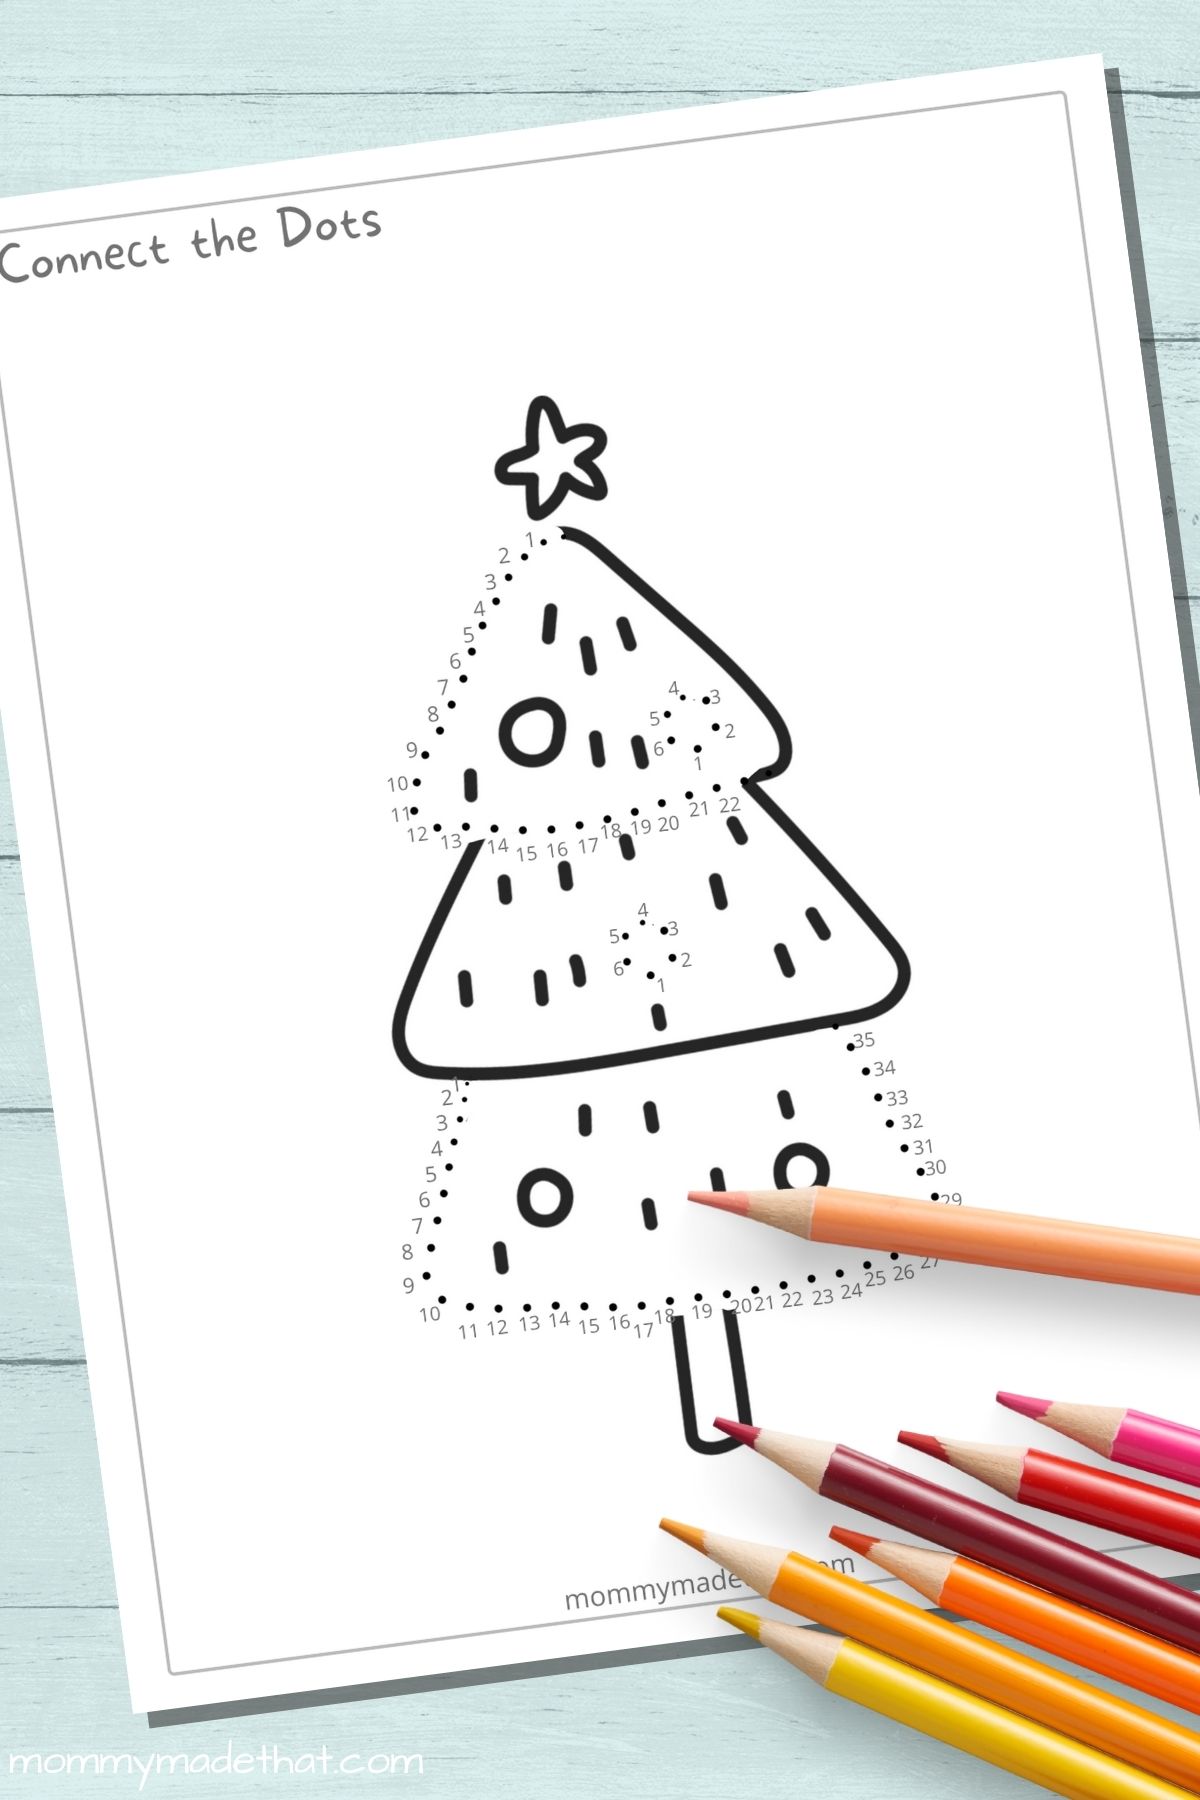 Christmas tree connect the dots